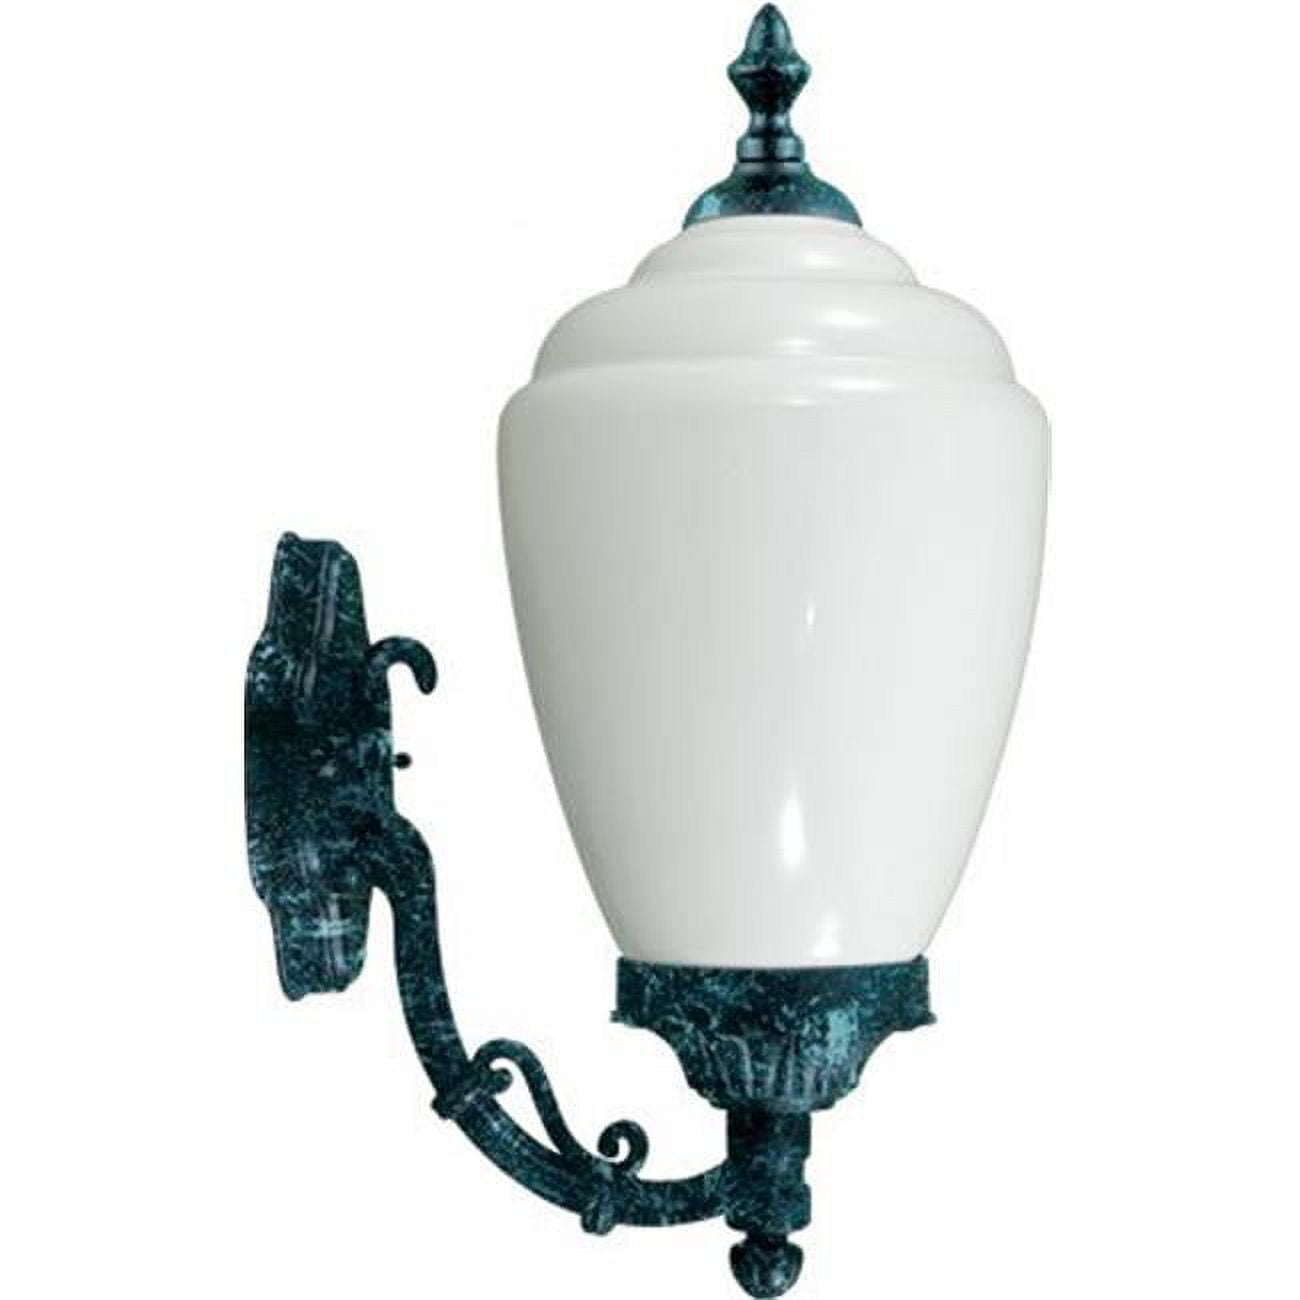 Picture of Dabmar Lighting GM290-VG Powder Coated Cast Aluminum Wall Light Fixture, Verde Green - 19.25 x 8.75 x 11.63 in.